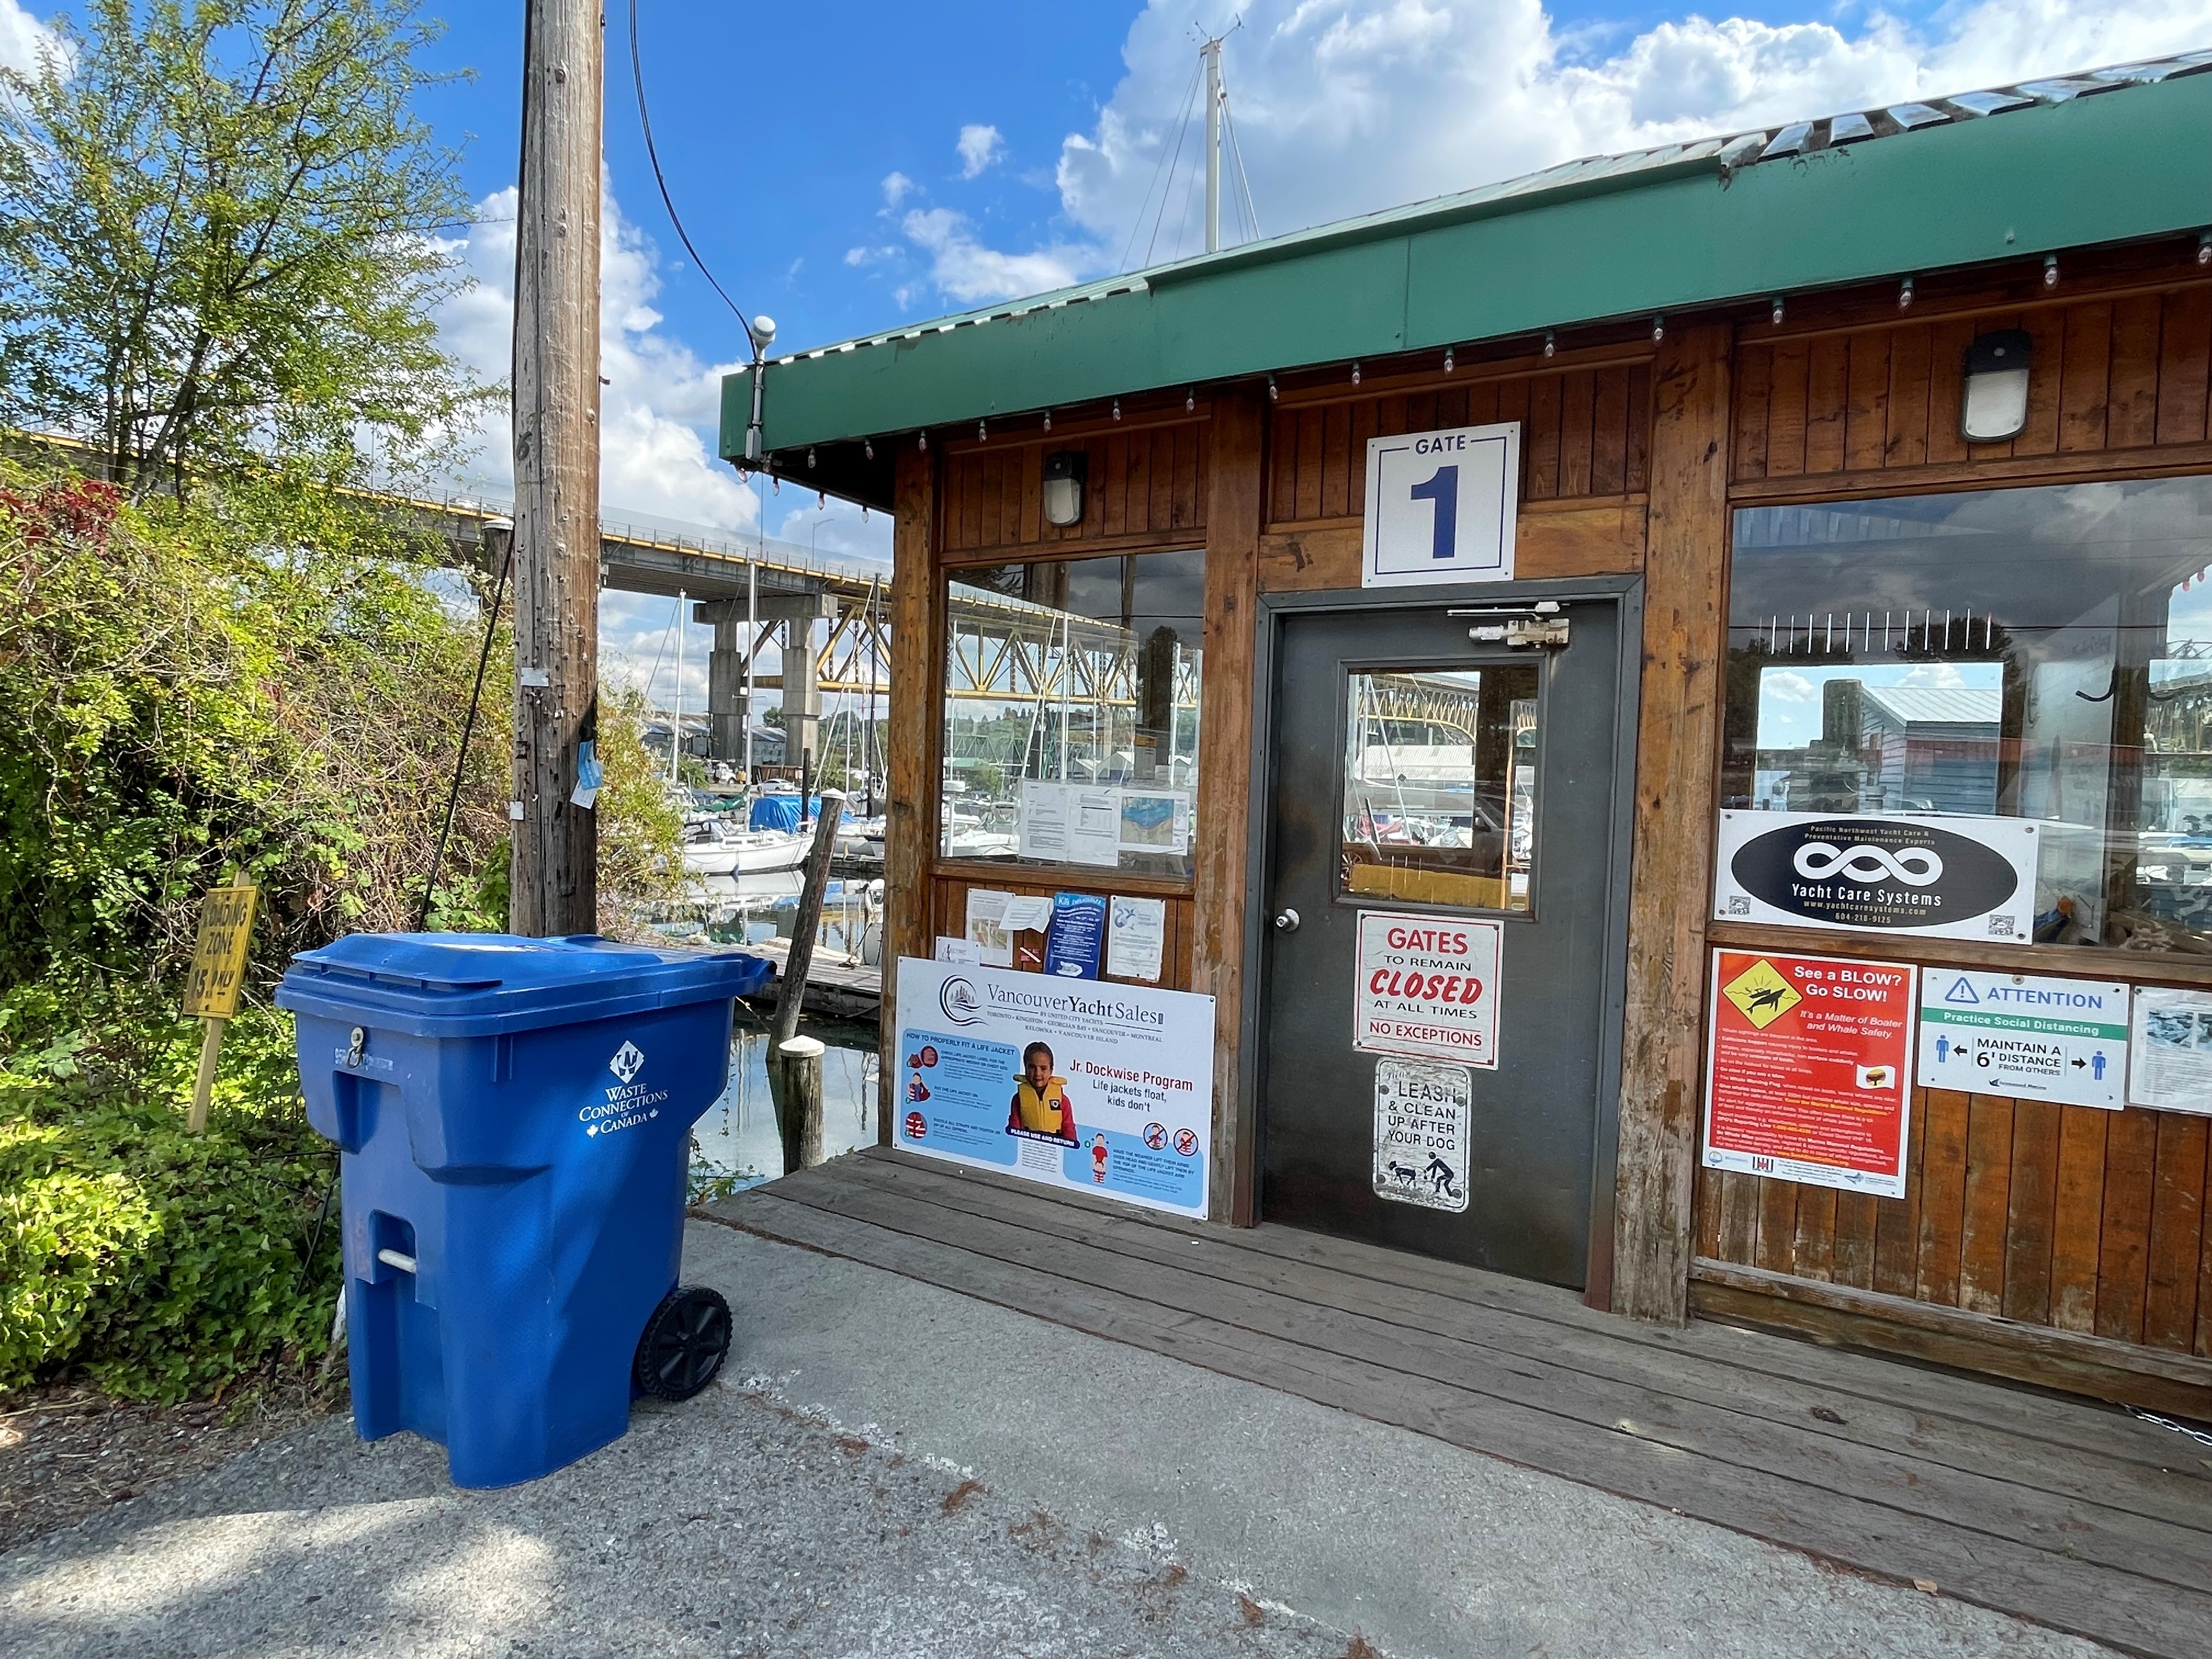 An image of a recycling tote in front of Gate 1 at Lynnwood Marina, as part of the recycling program newly implemented at this Squamish Nation-owned business.